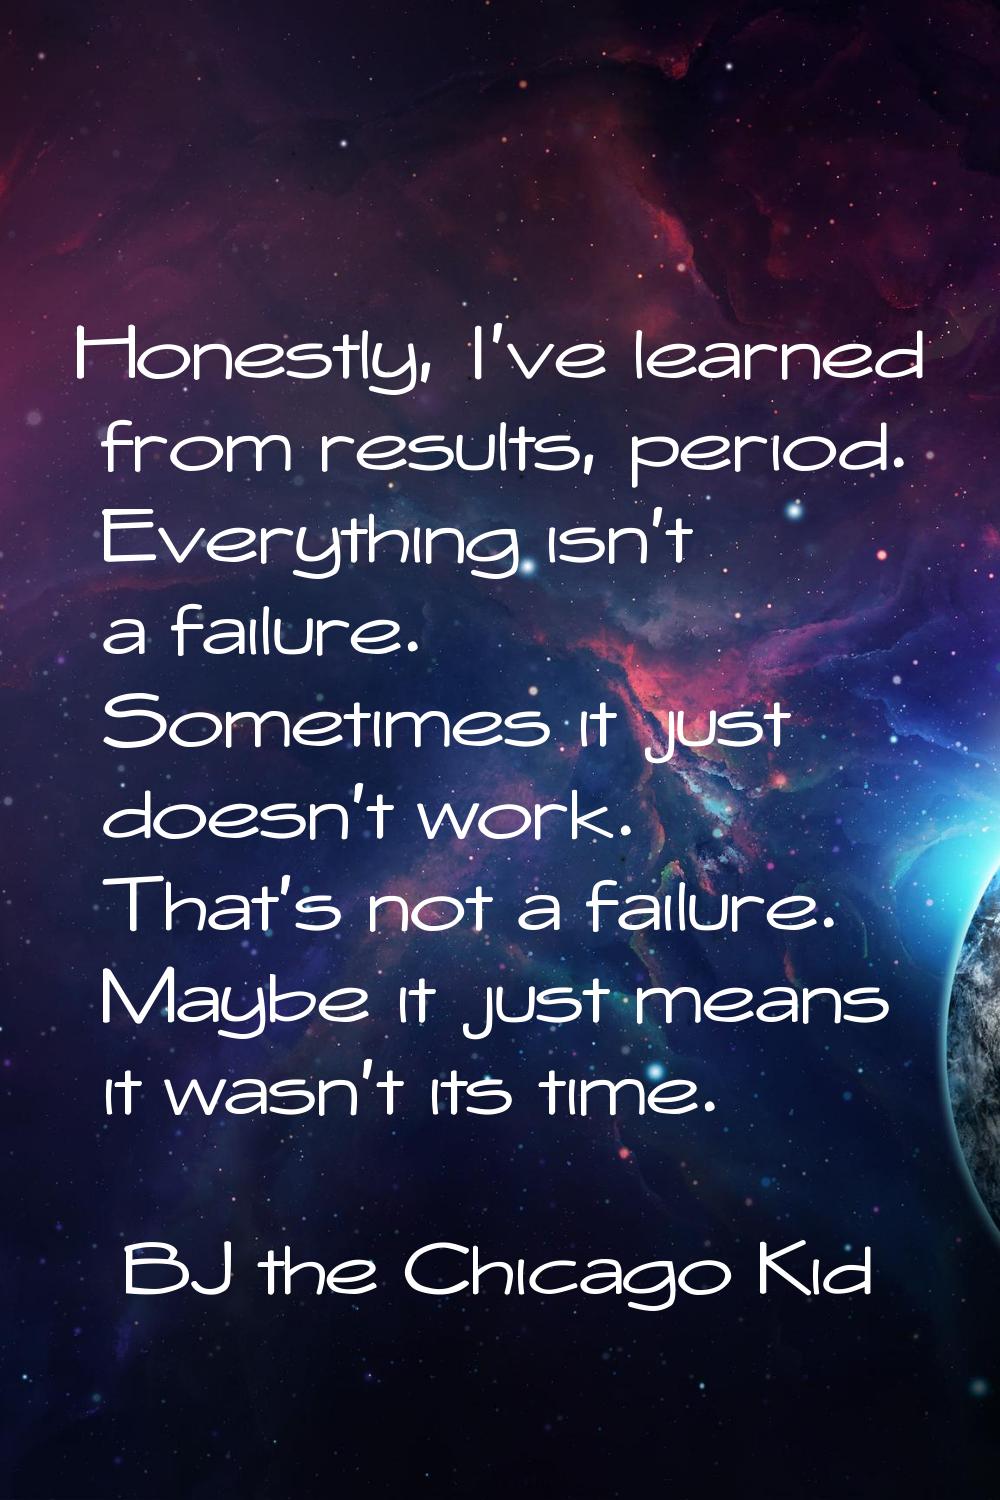 Honestly, I've learned from results, period. Everything isn't a failure. Sometimes it just doesn't 